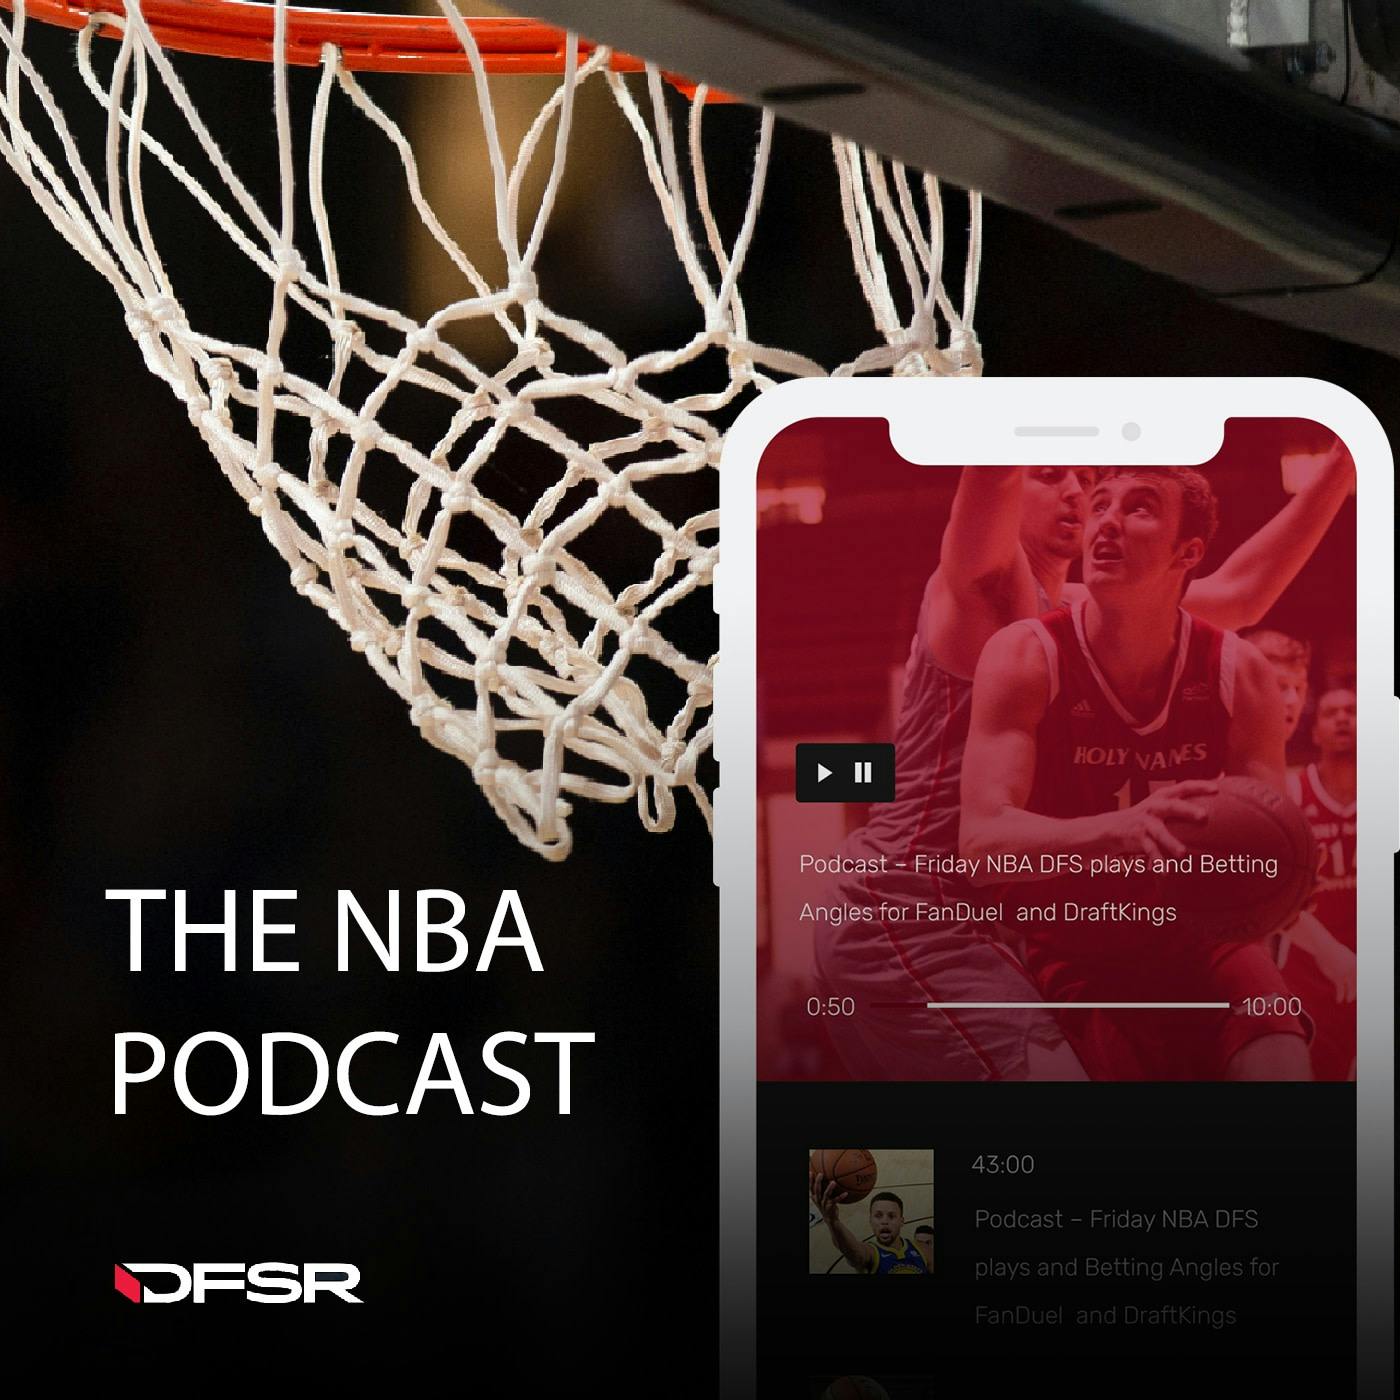 DFS NBA Podcast for Opening Night! Tuesday 10/16/18 - FanDuel and DraftKings